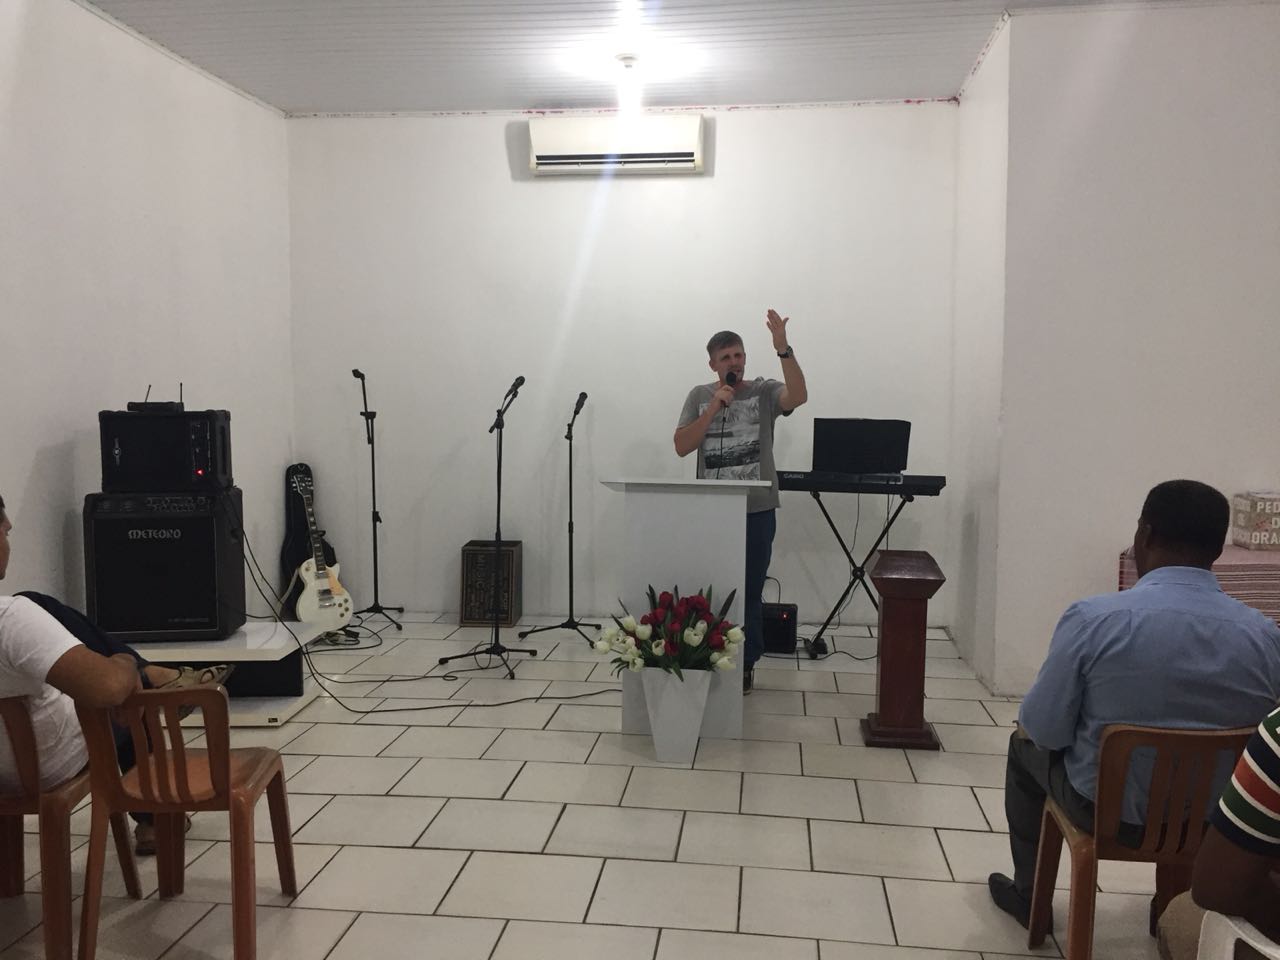 I met a Baptist pastor the last time I visited Humaita. He insisted we come to church and basically turned the service over to us. He even let a gringo preach a bit!